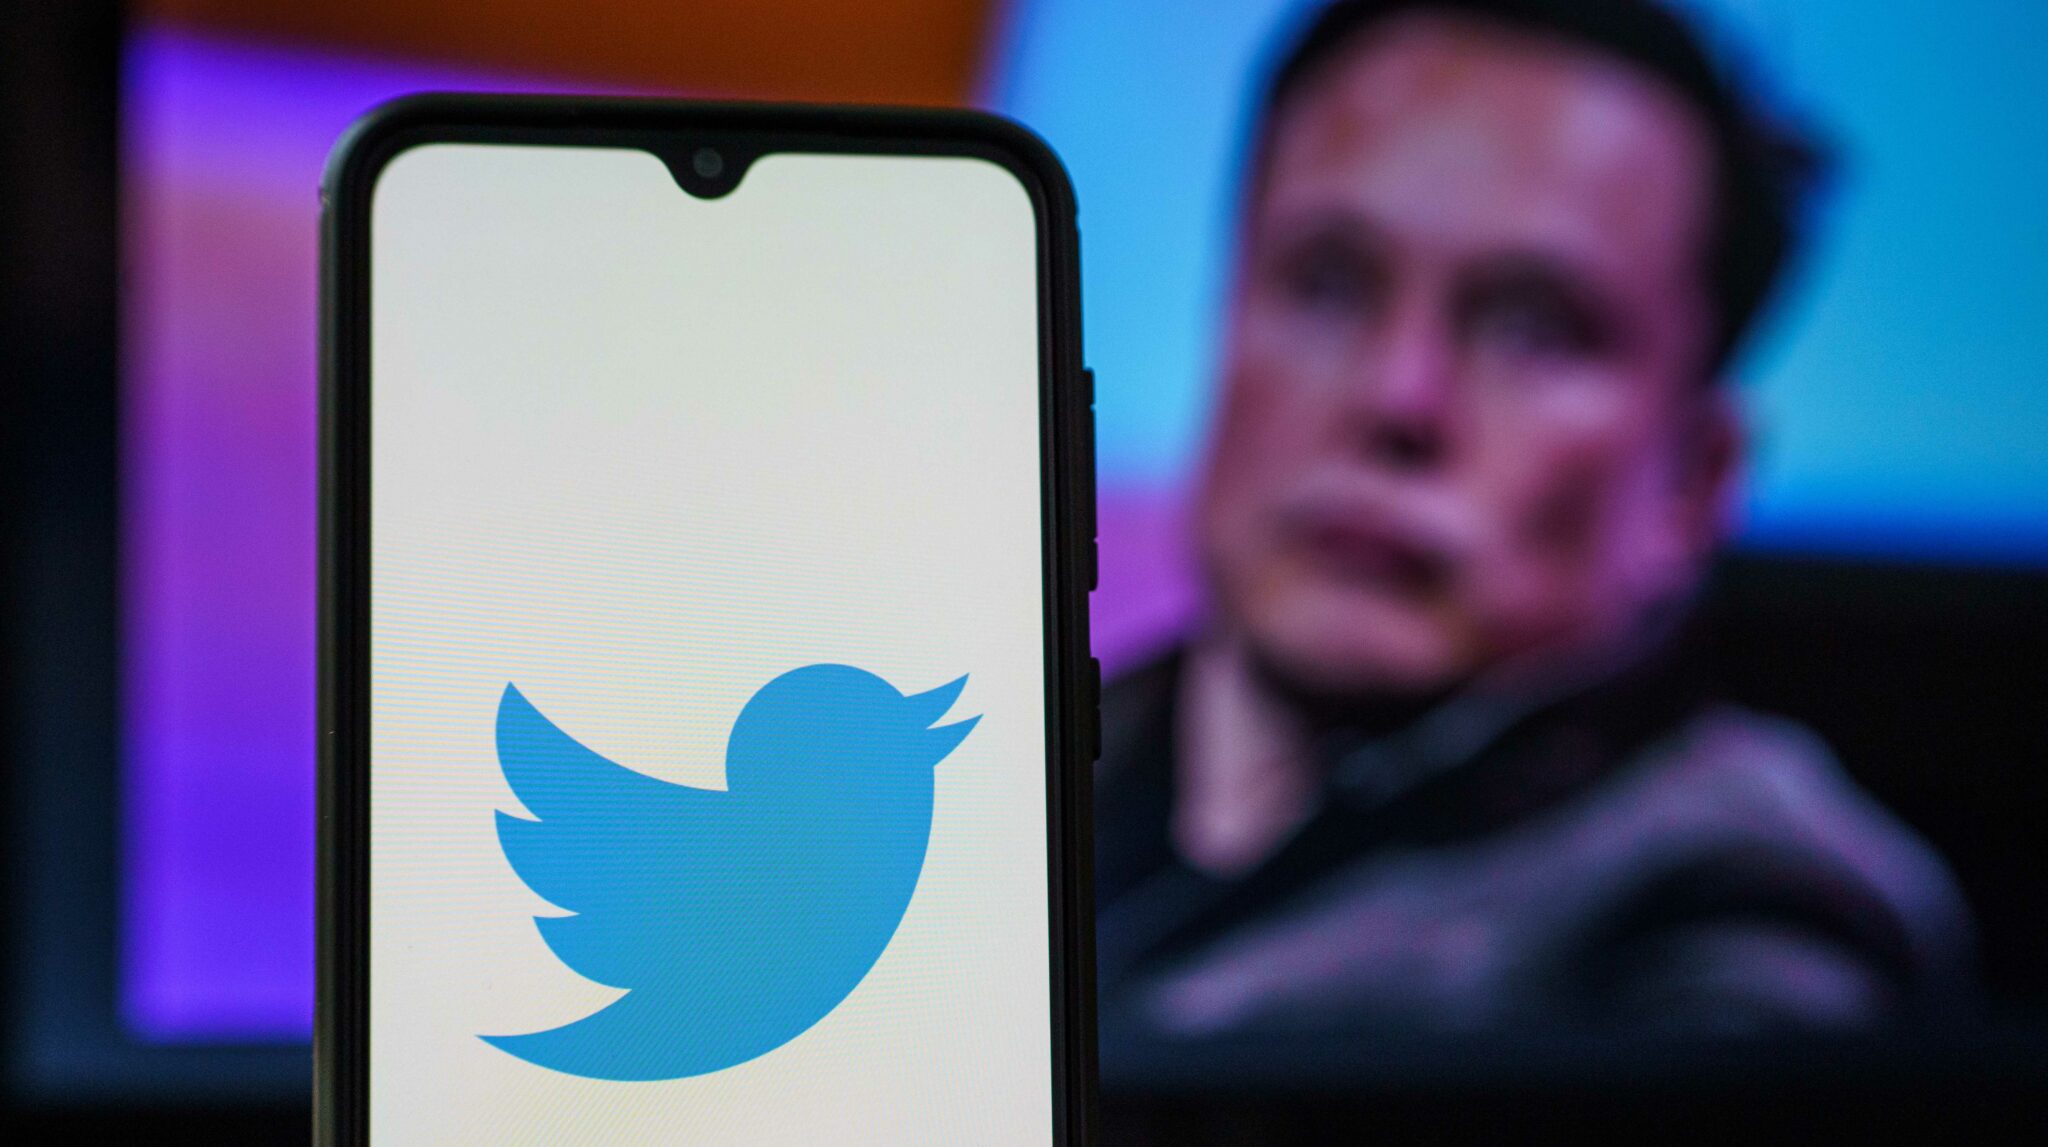 Musk aims to significantly increase Twitter's revenue by 2028